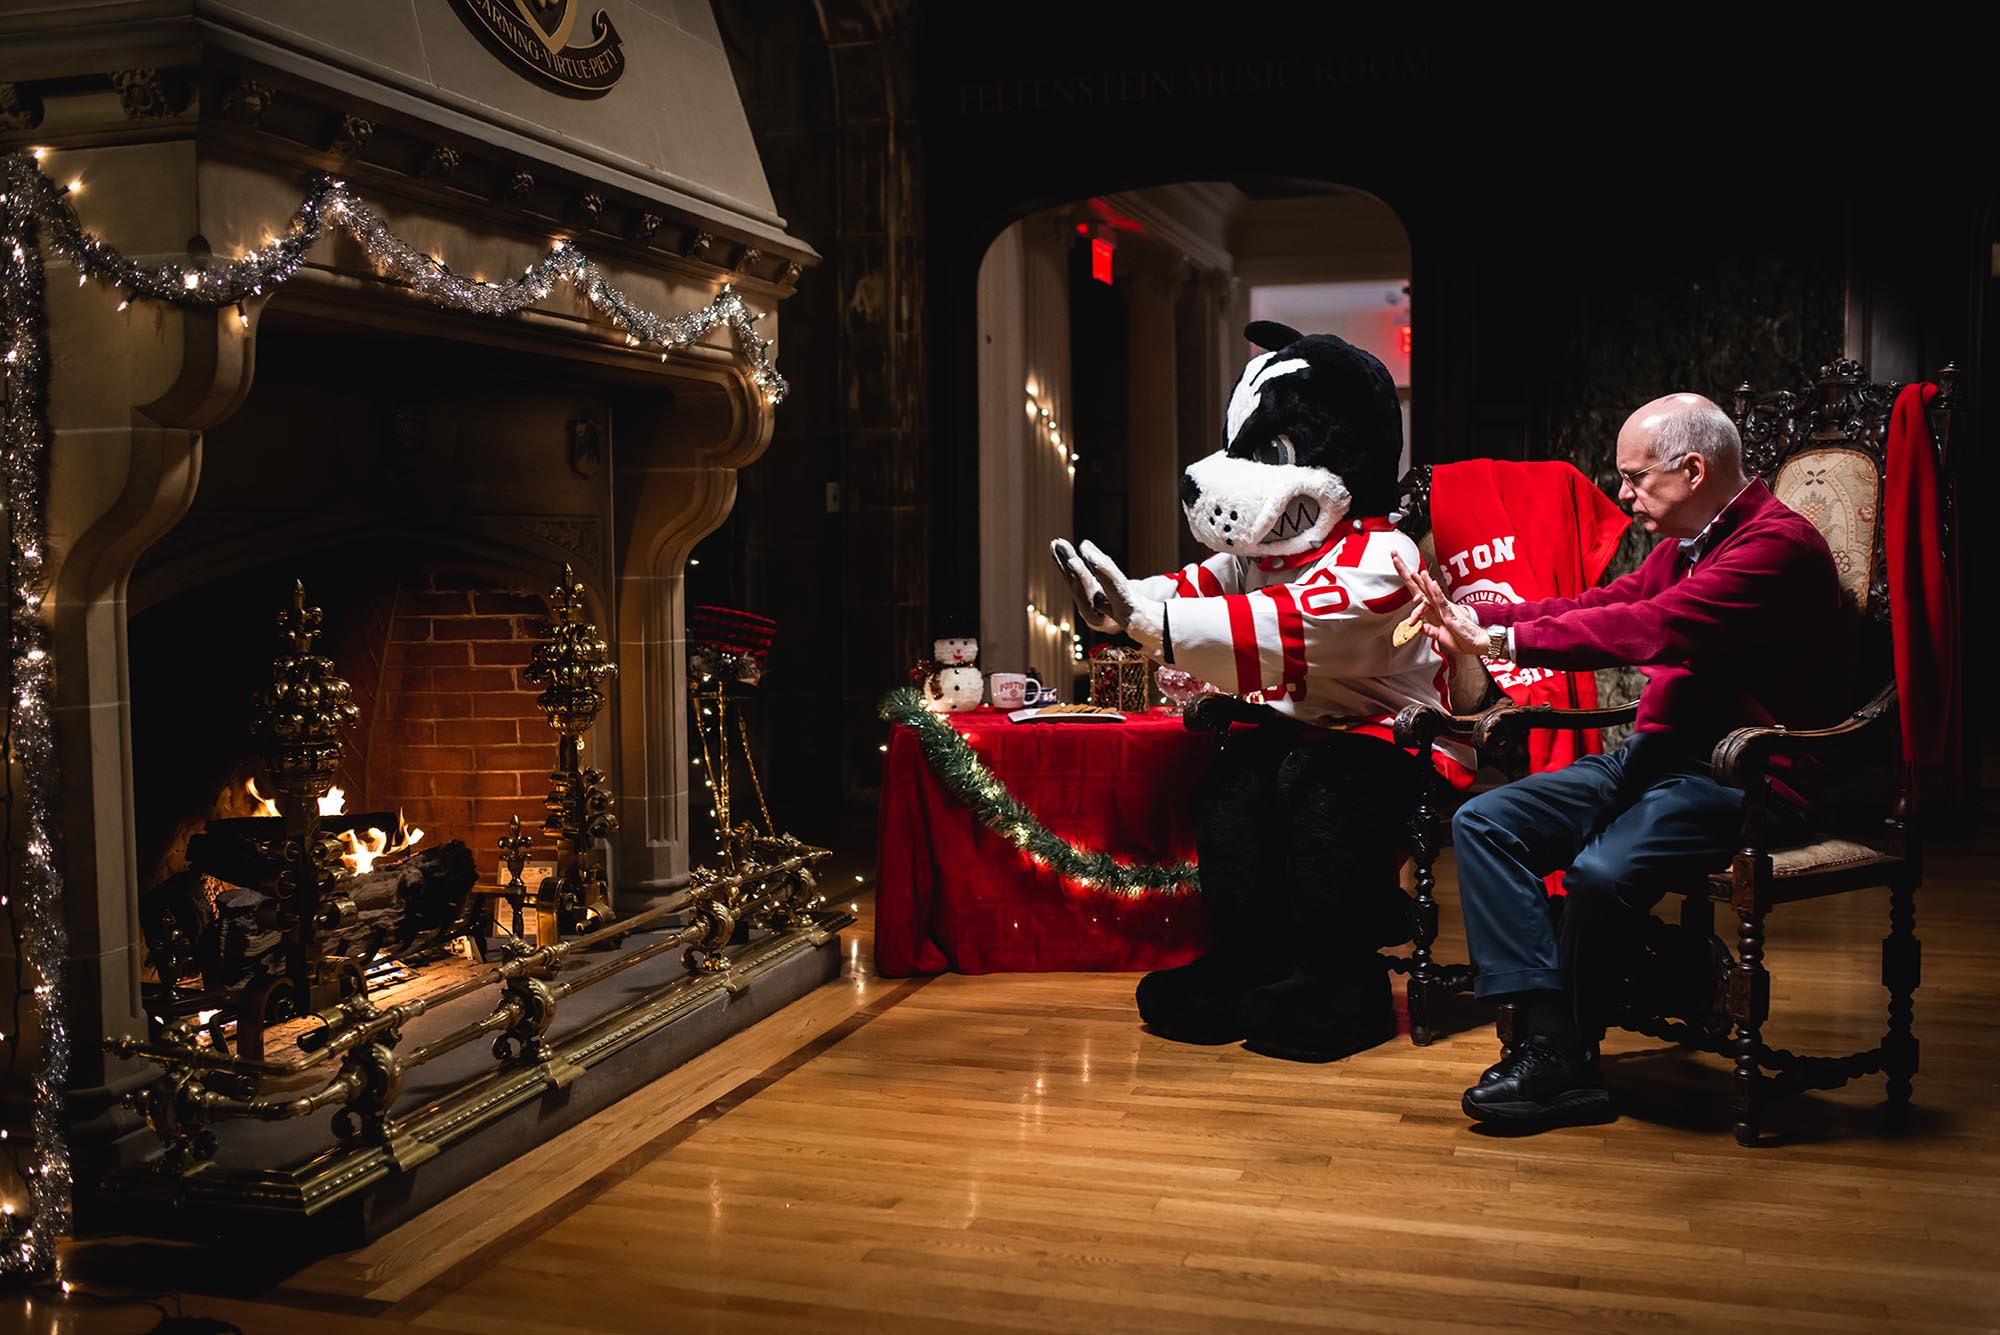 Photo: President Ken Freeman, an older, balding white man wearing glasses, a red holiday sweater, and jeans sits next to a lit fireplace with Rhett, a Boston Terrier school mascot wearing a red and white Bu Hockey jersey. They both sit and splay their arms out towards the lit fireplace to their left.